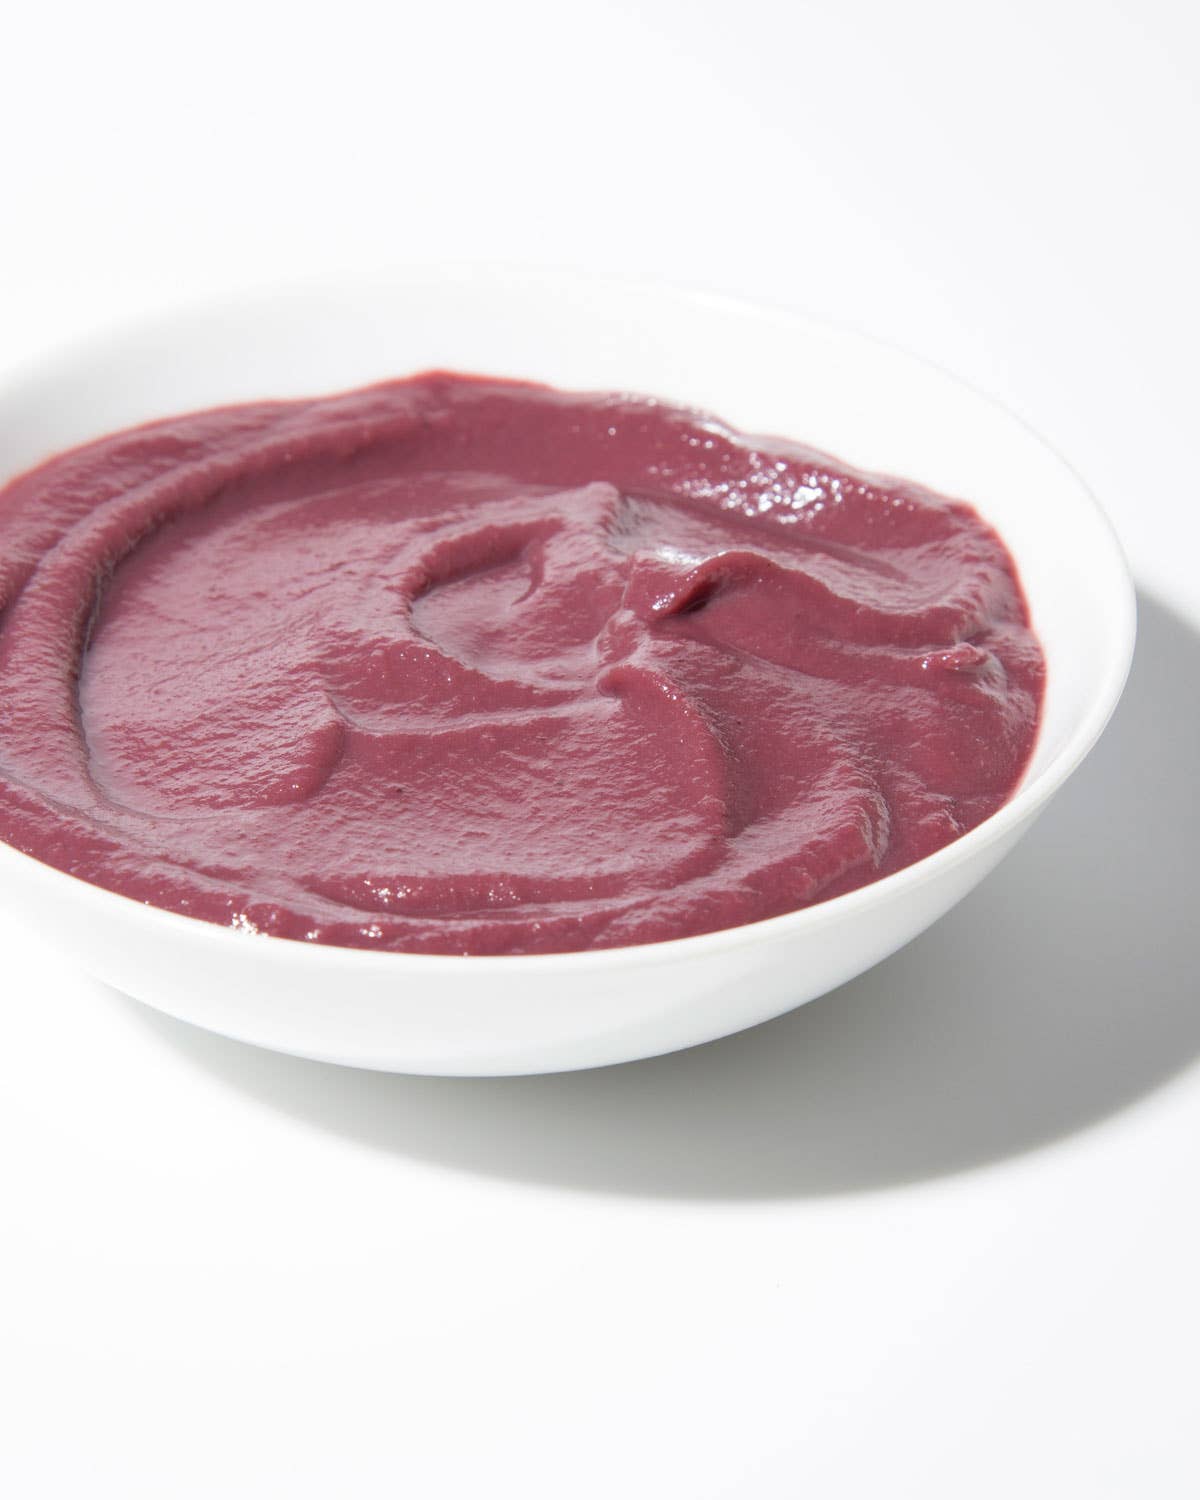 Shallot and Red Wine Purée